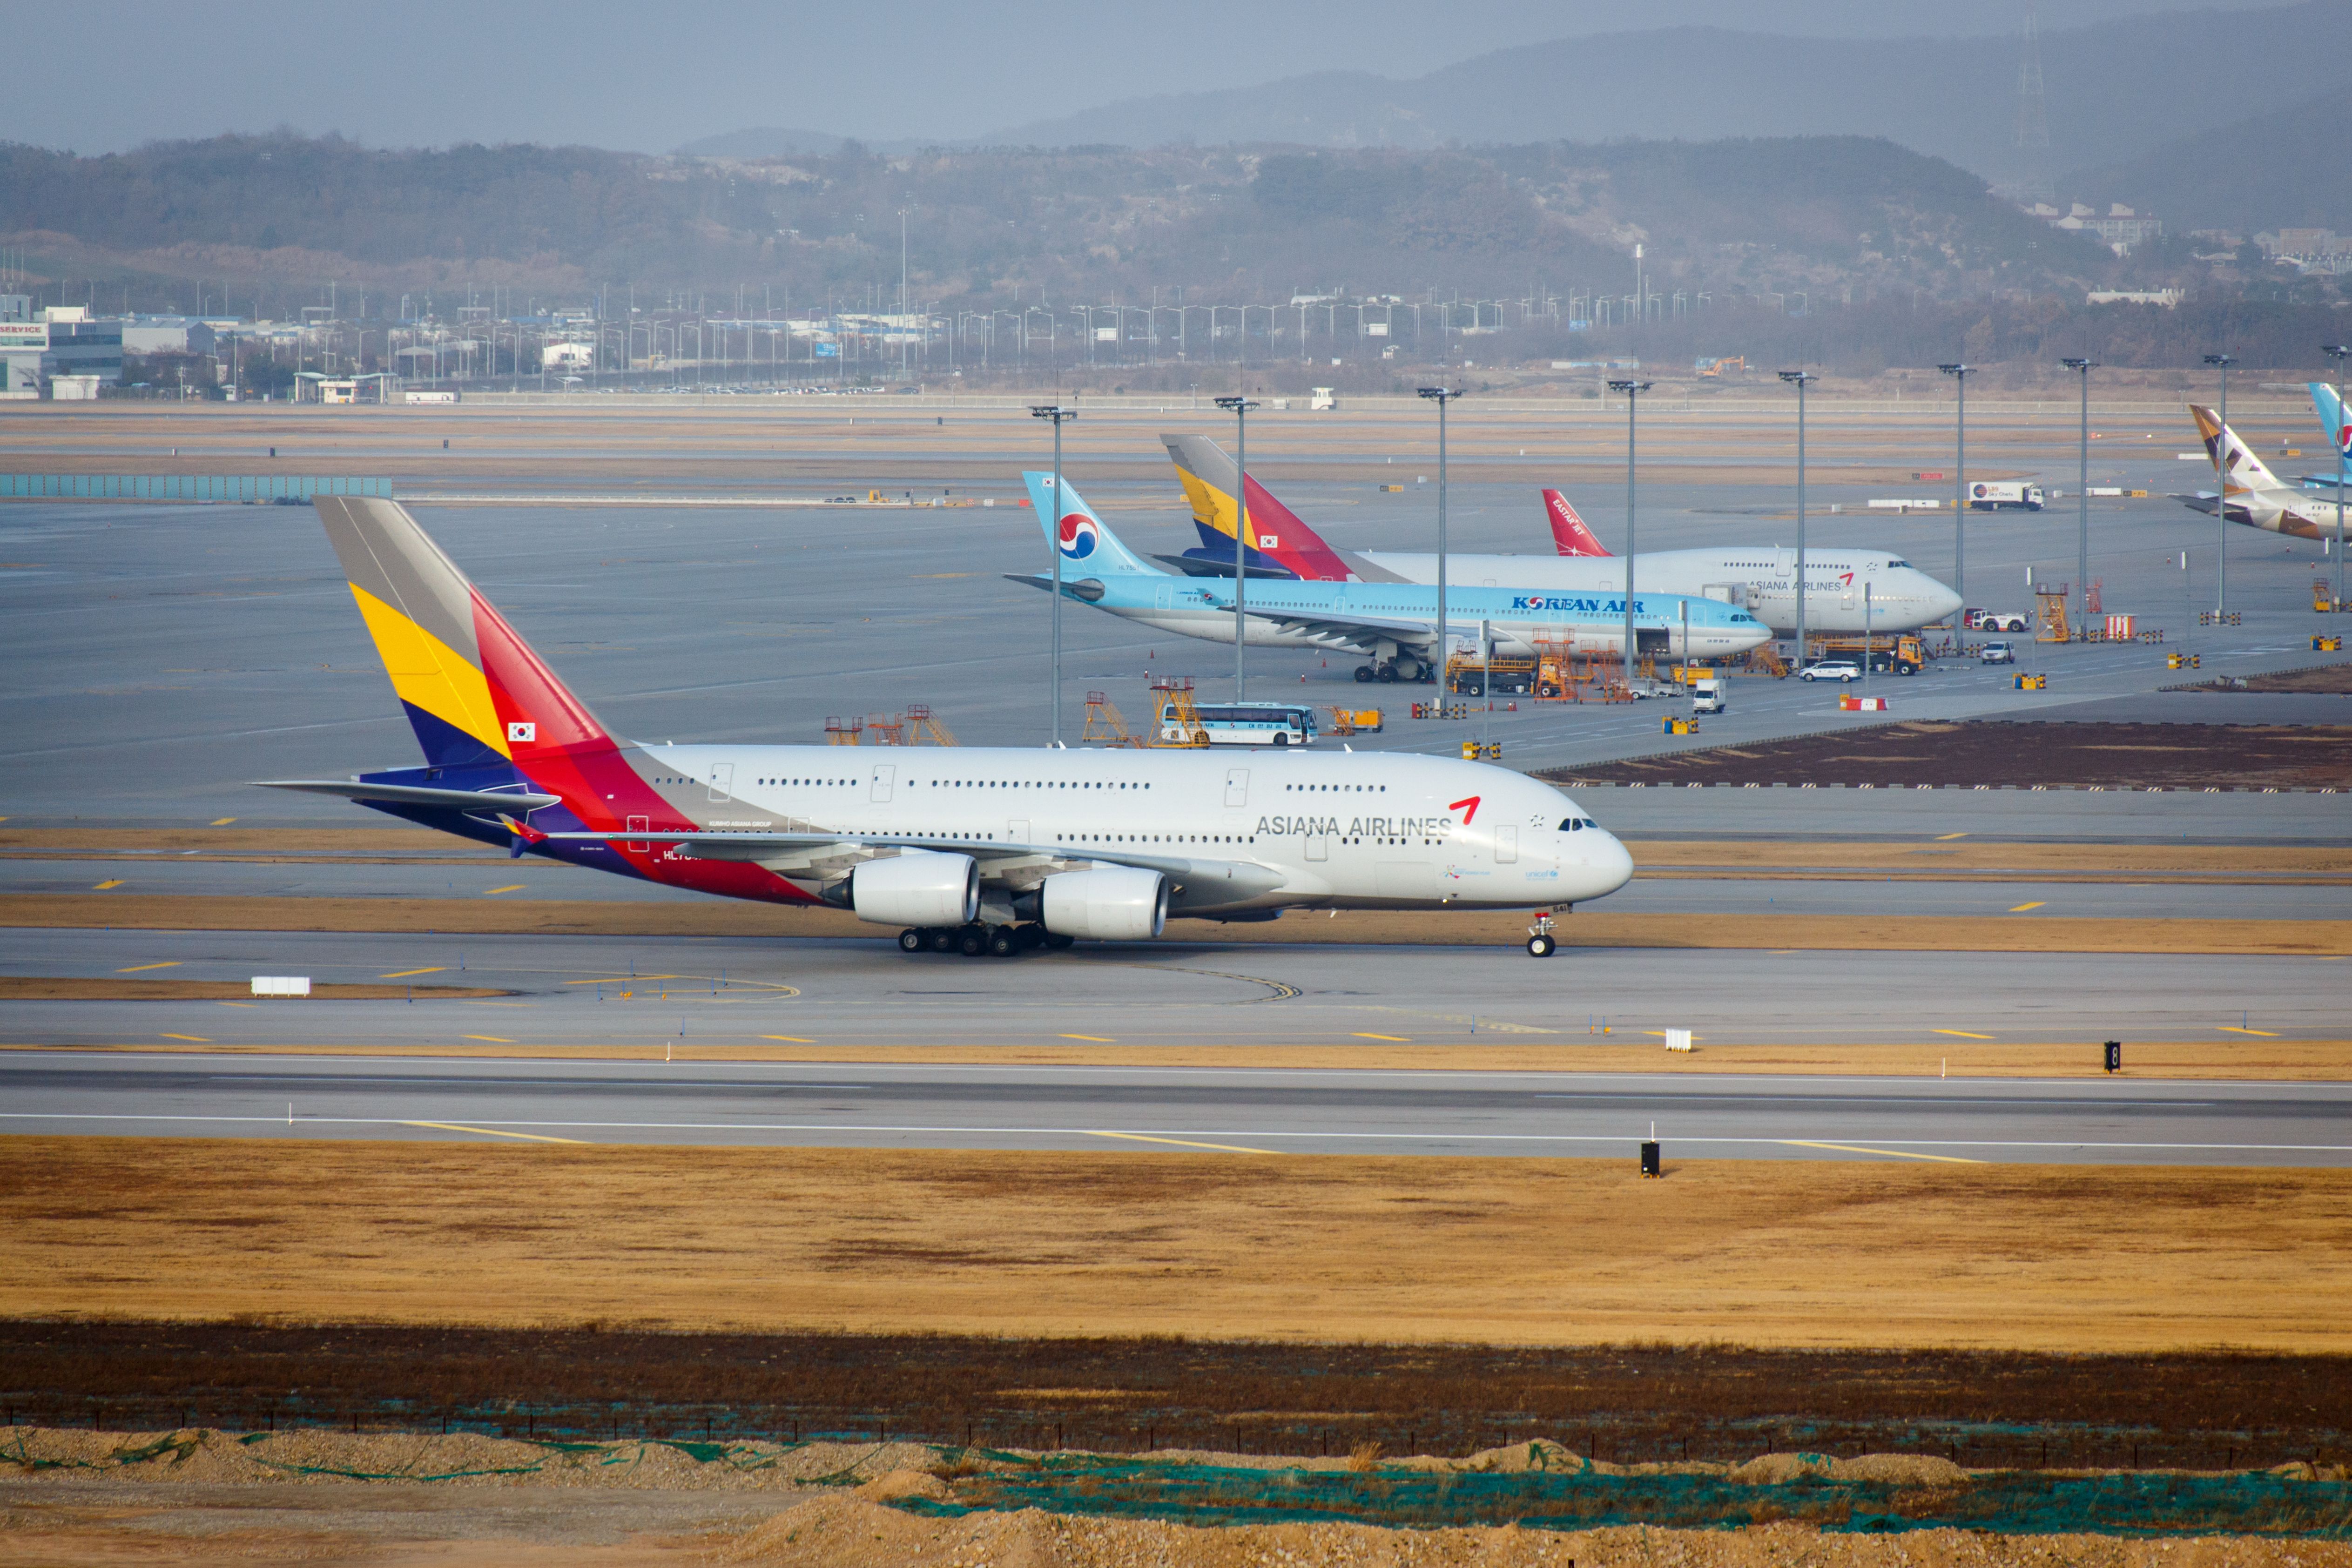 Asiana Airlines and Korean Airlines aircraft in Seoul